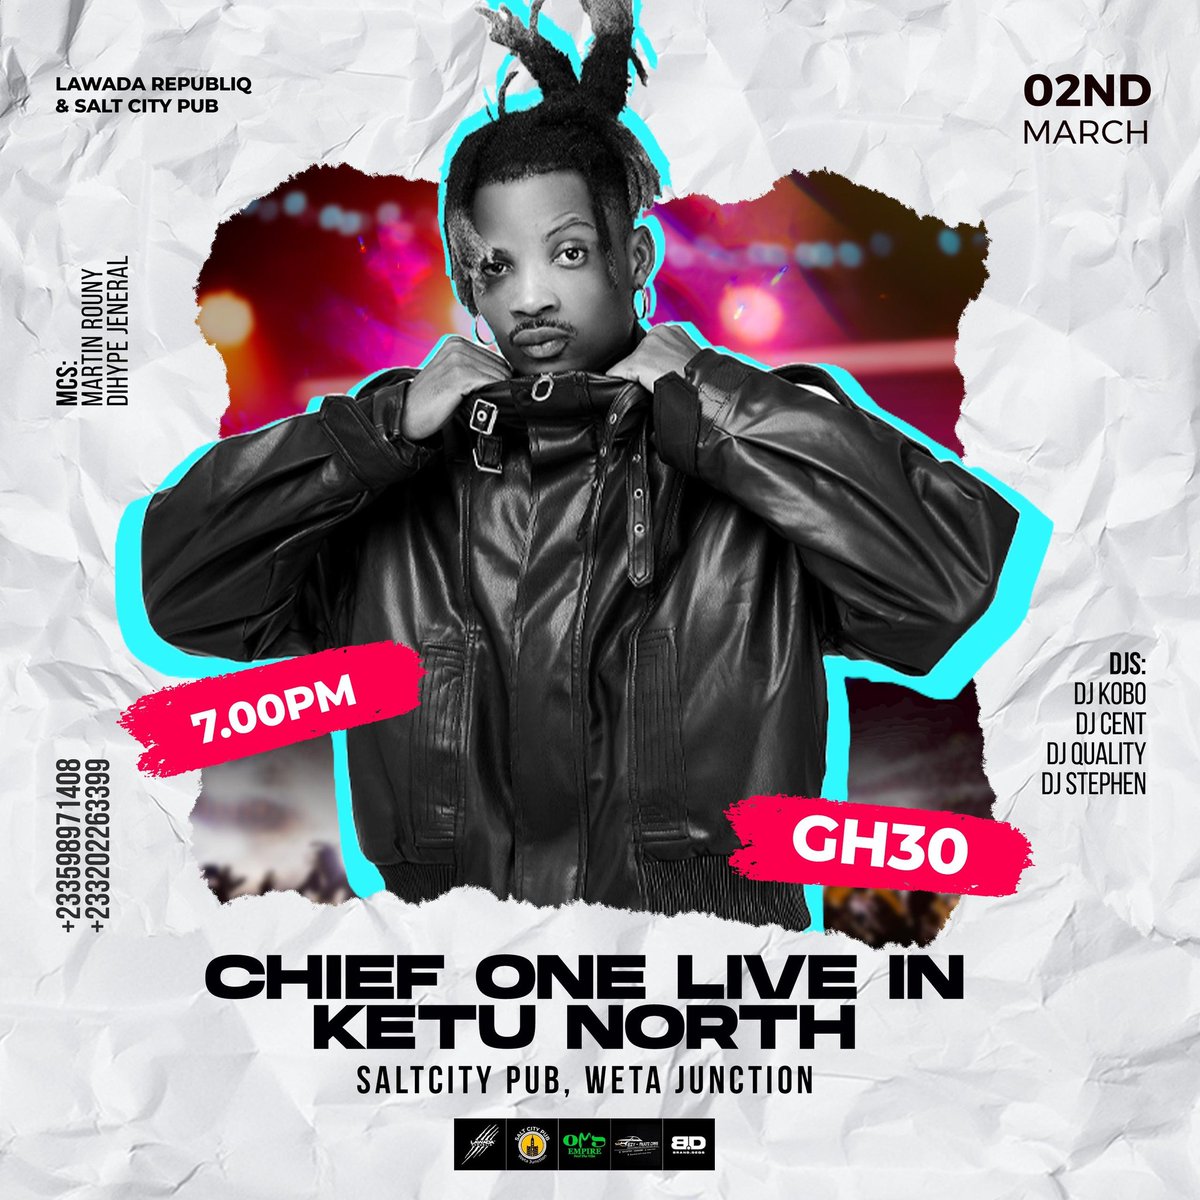 Get ready to party in KETU NORTH!! @chief__one  is coming to SaltCity Pub on March 2nd! It's going to be an unforgettable night, so don't miss out on the craziness! Let's roll out big and have fun together. #lawadarepubliq #SaltCityPub